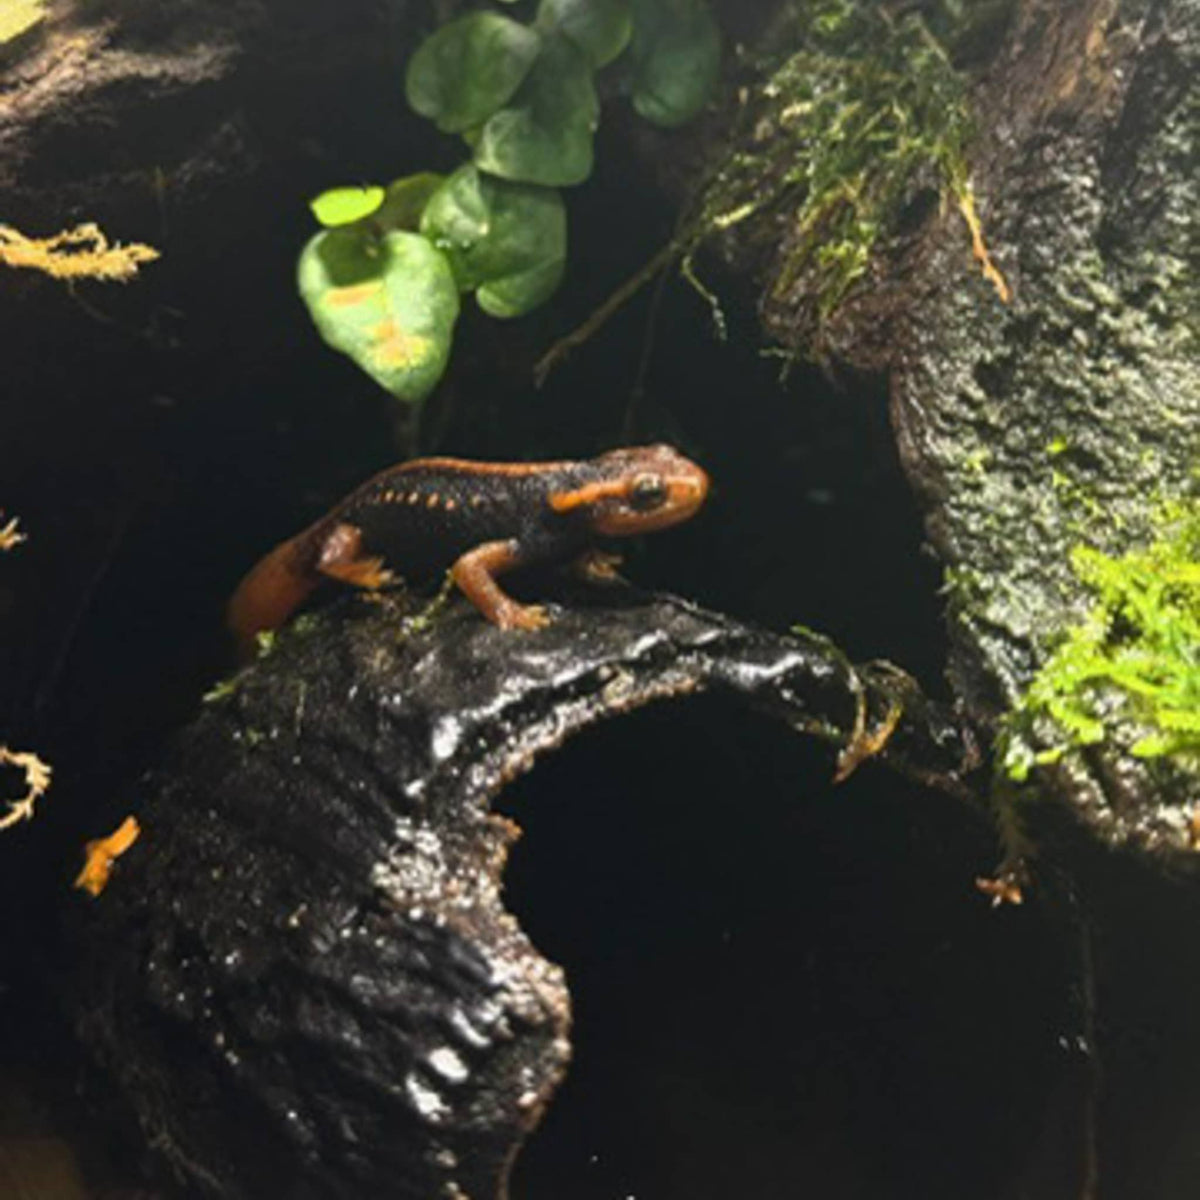 An orange and black newt sits on top a cacao pod in a bioactive enclosure at Betta Botanicals.